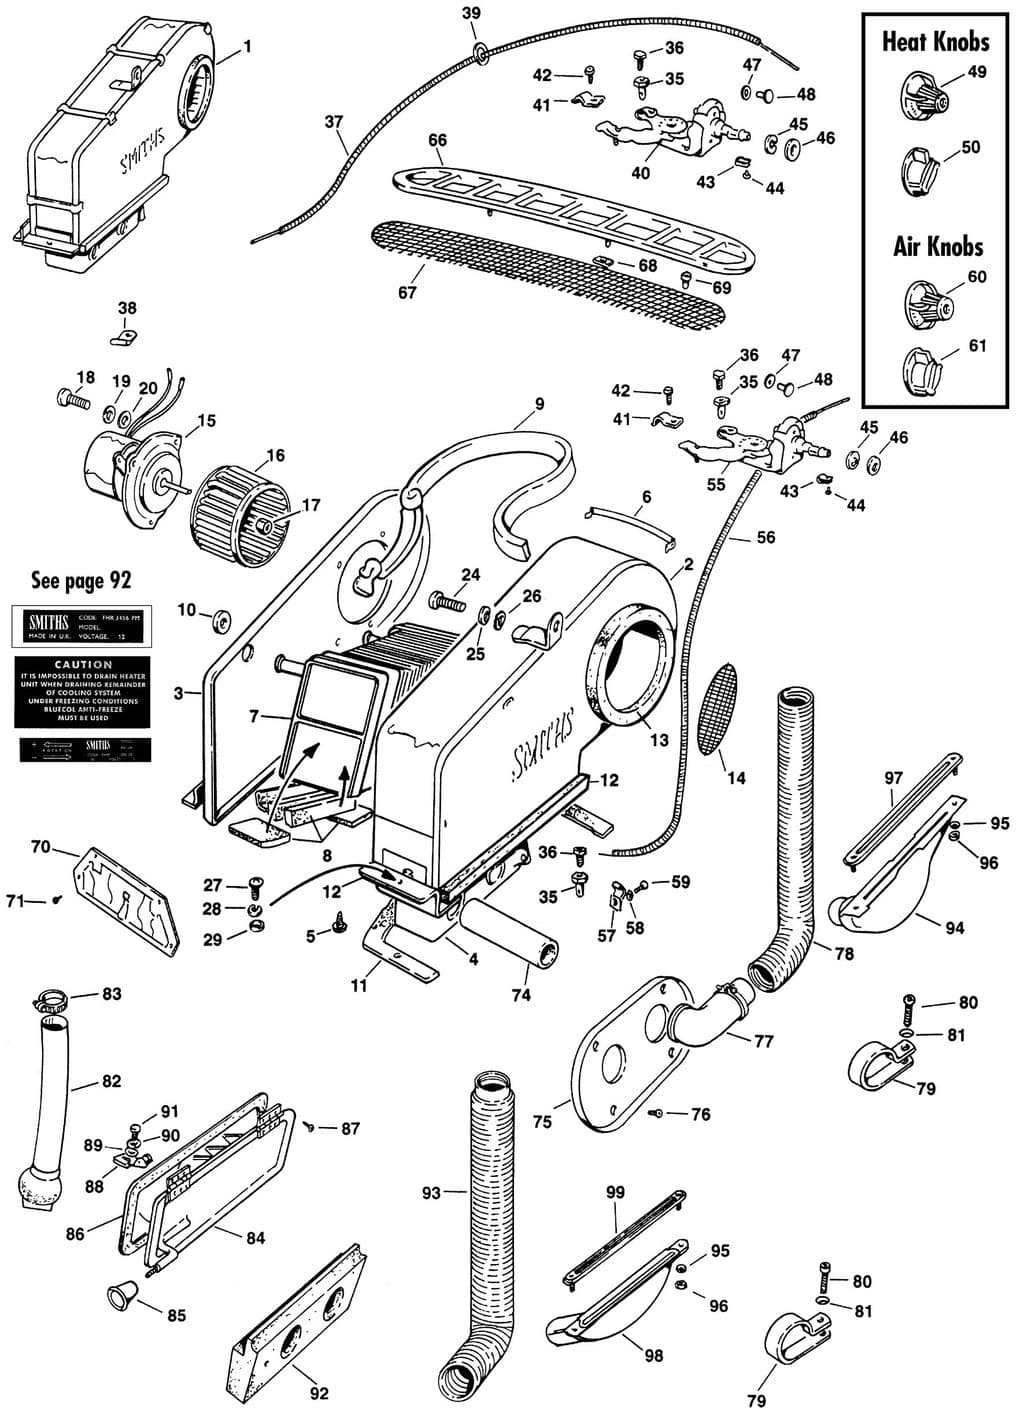 MGC 1967-1969 - Blowers & fans | Webshop Anglo Parts - Heater system - 1